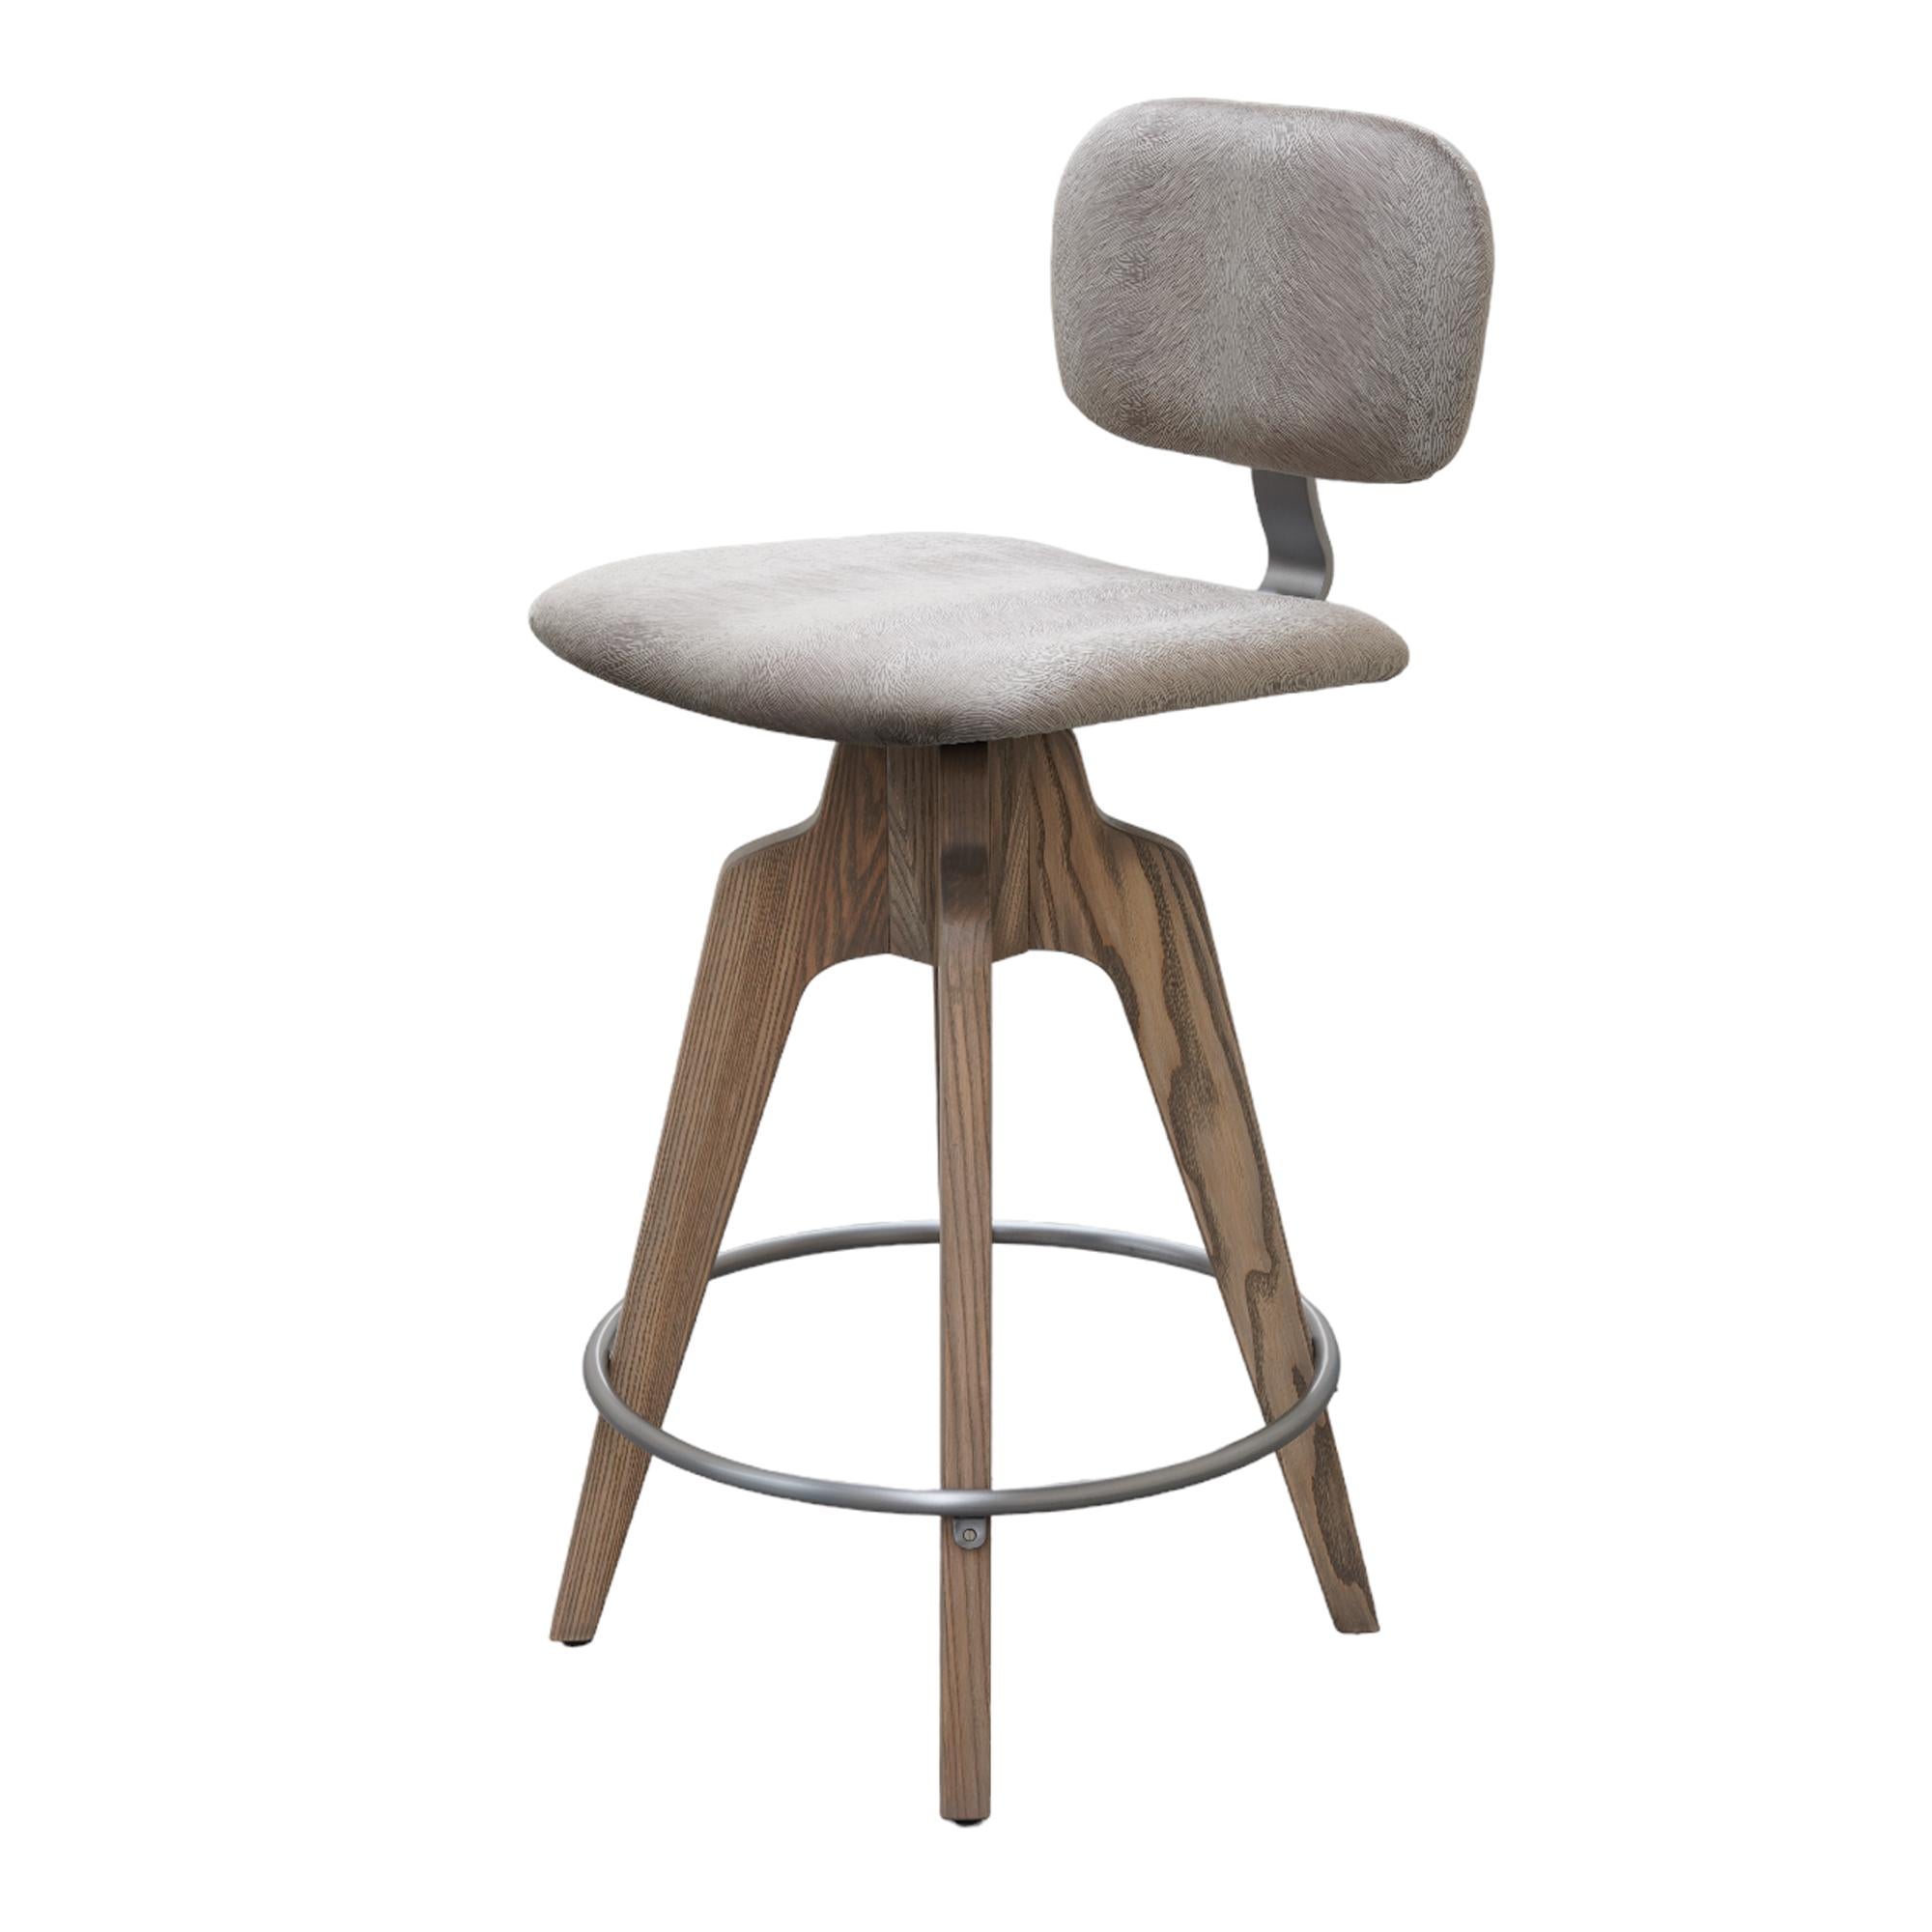 Reeves Swivel Bar Stool W/ Ash legs stained Walnut, Leather & Brass Finish.  For Sale 7